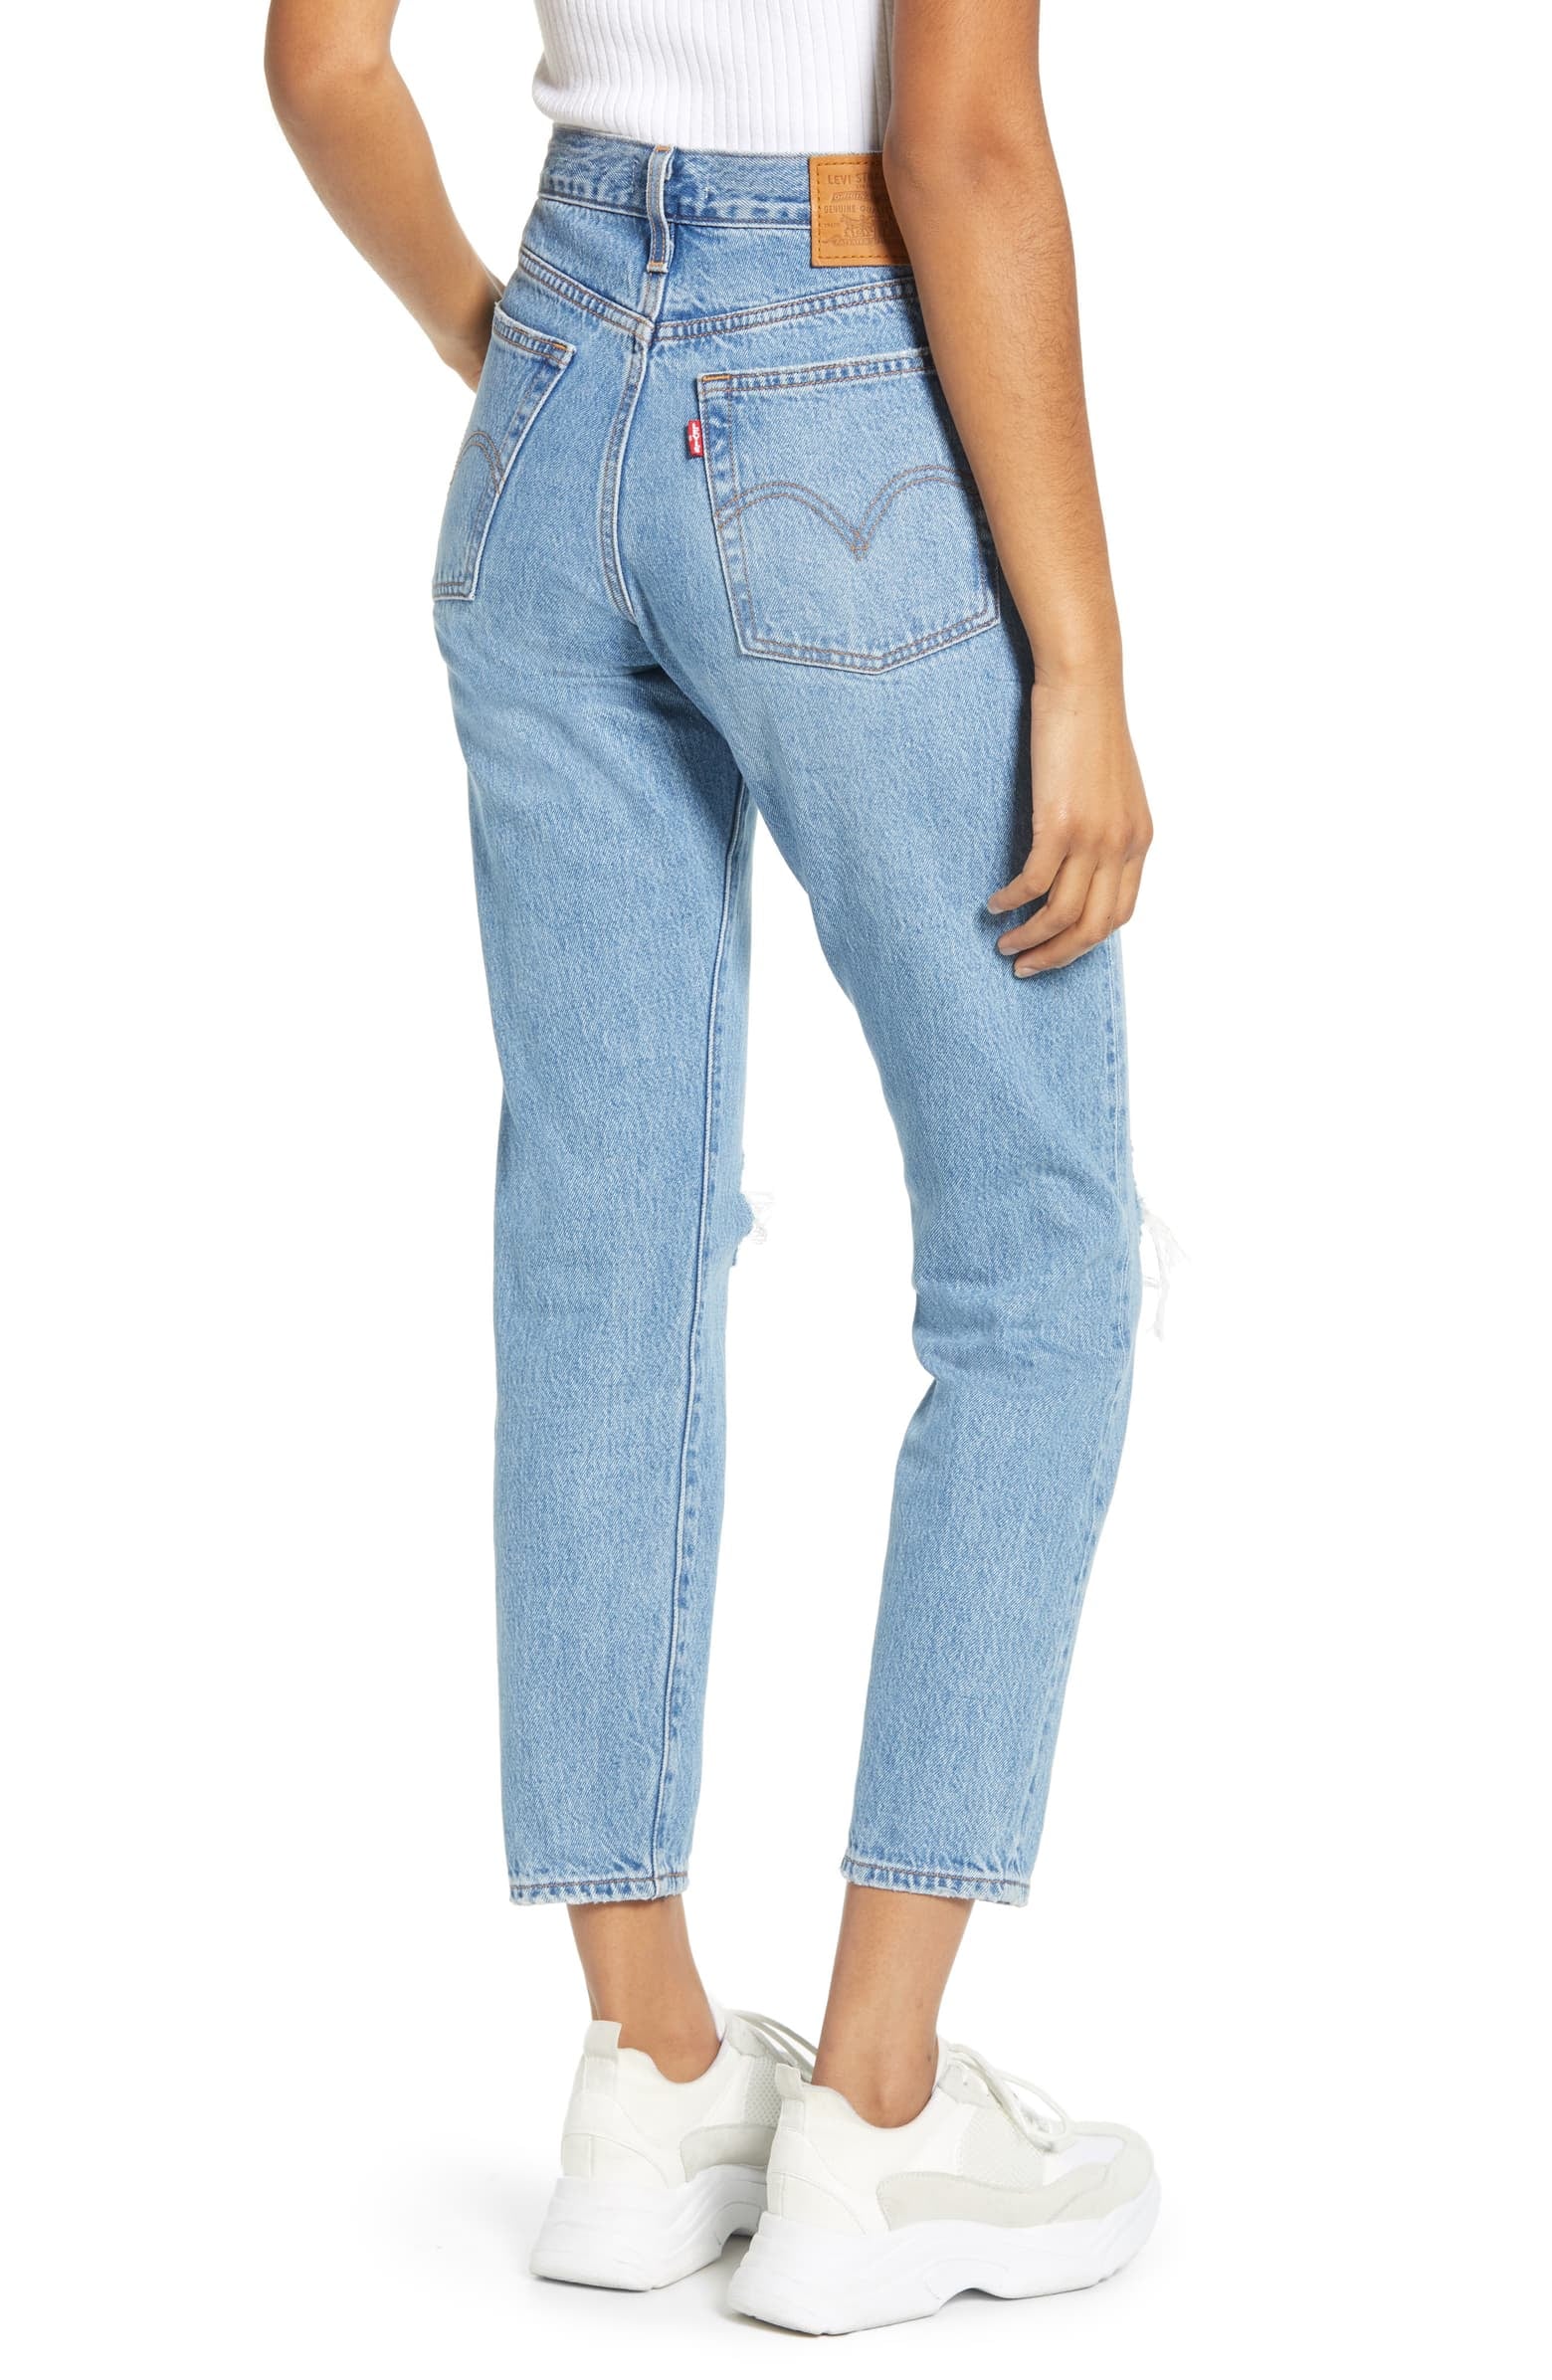 levi's wedgie ripped jeans